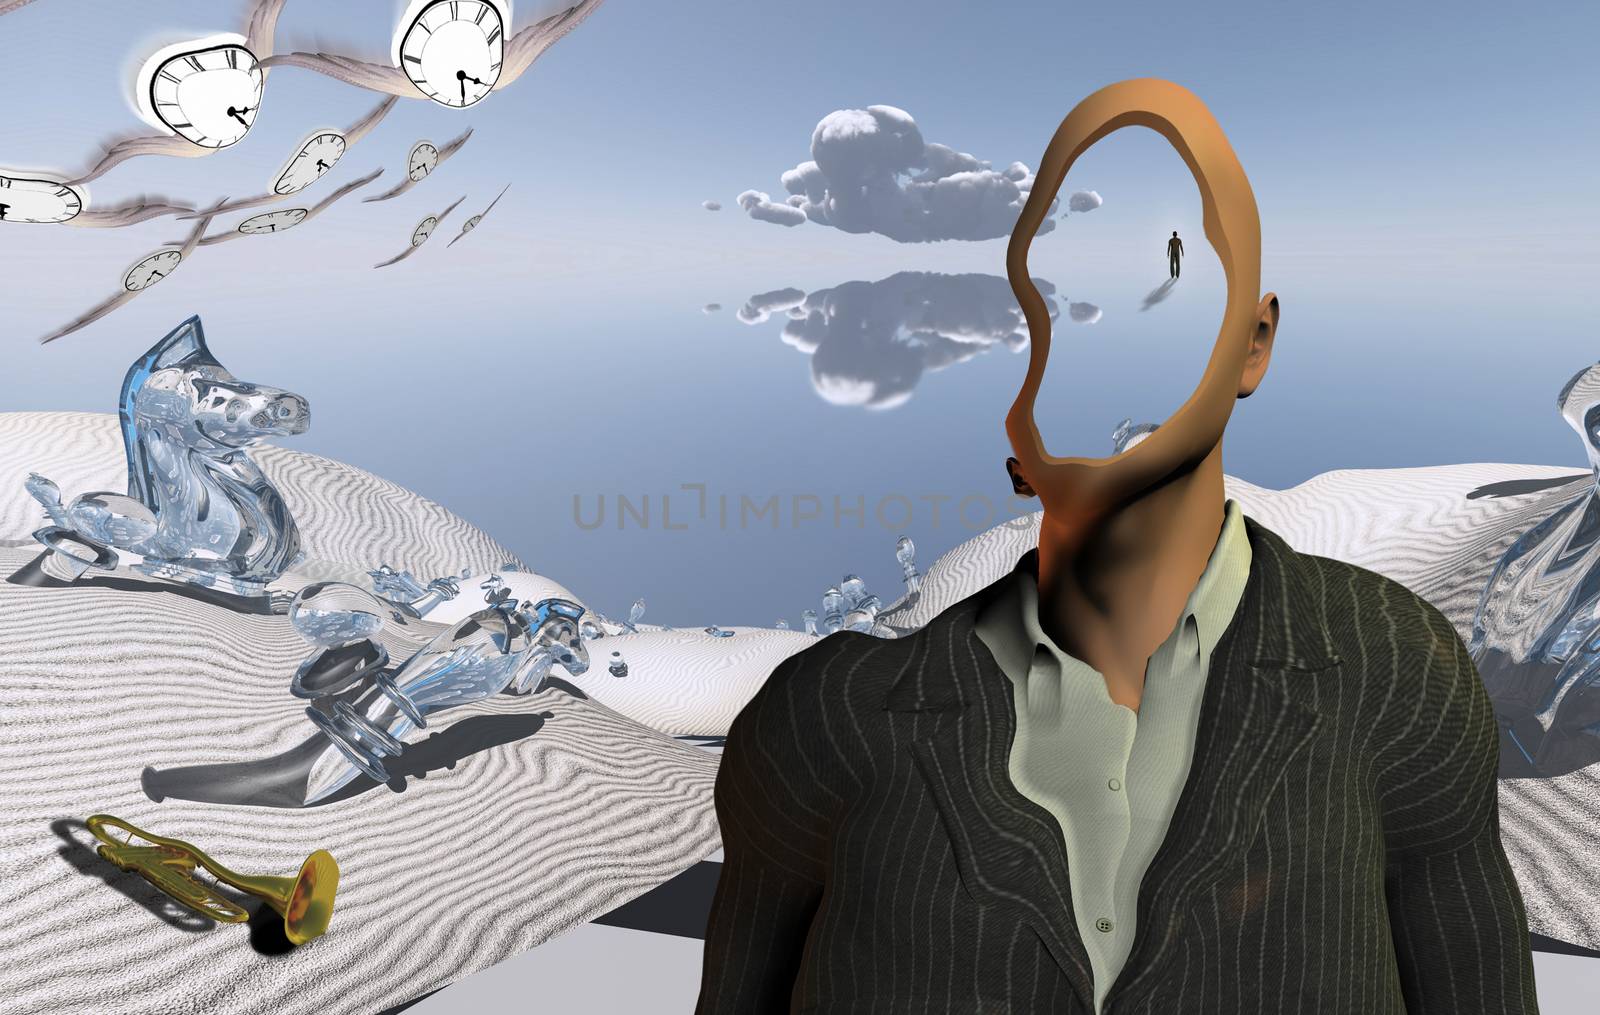 Surreal desert with chess figures and trumpet. Faceless man in suit and winged clocks. Figure of man in a distance. 3D rendering